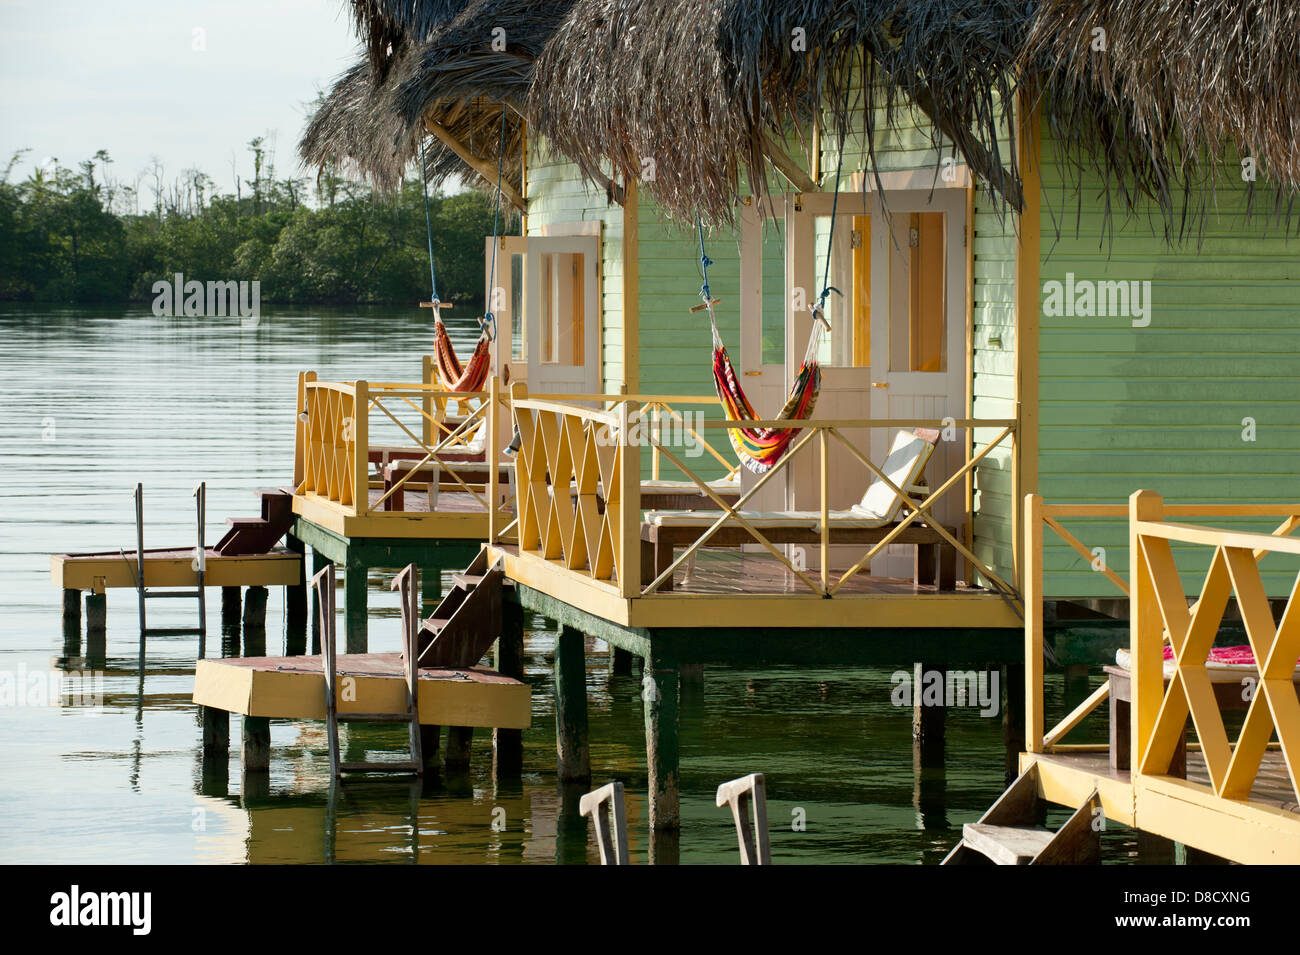 Thatch roofed bungalows on stilts in lagoon at Colon Island Stock Photo